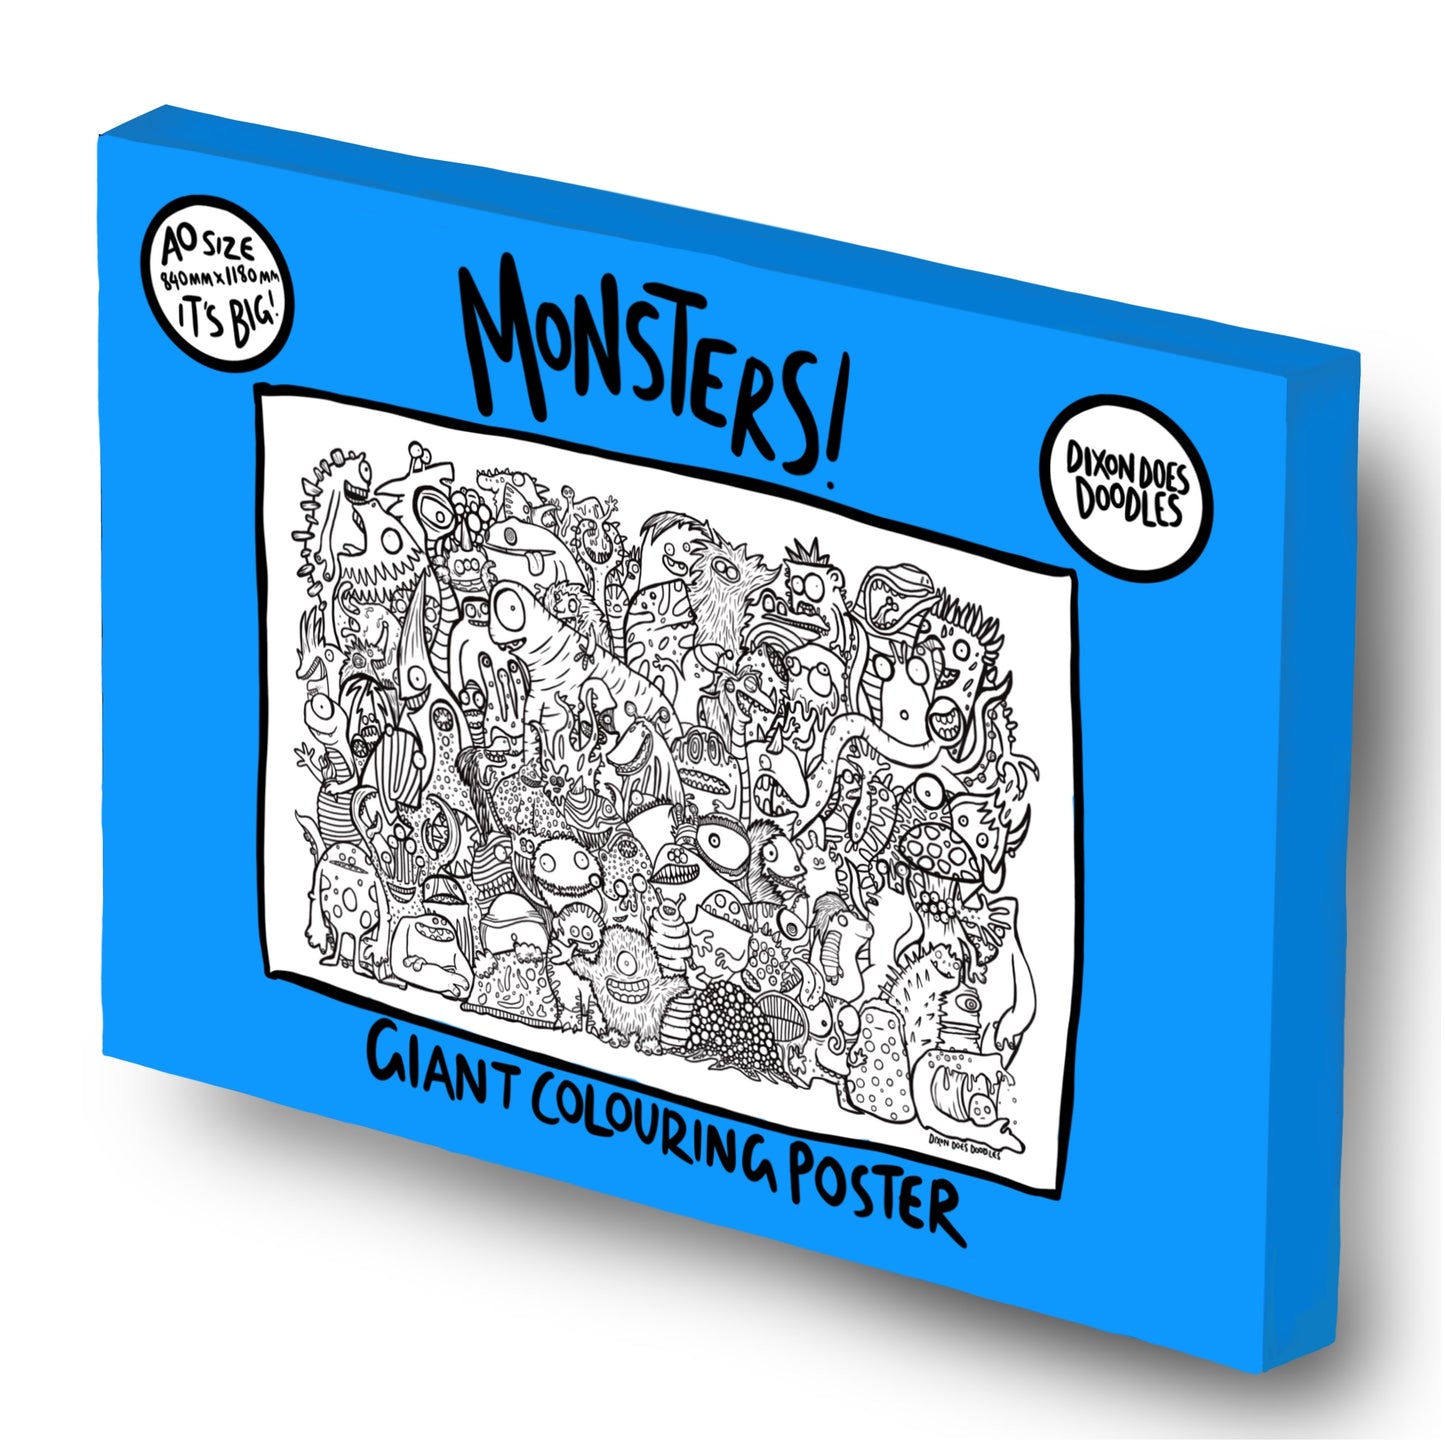 Monsters! Giant Colouring Poster Free UK Postage